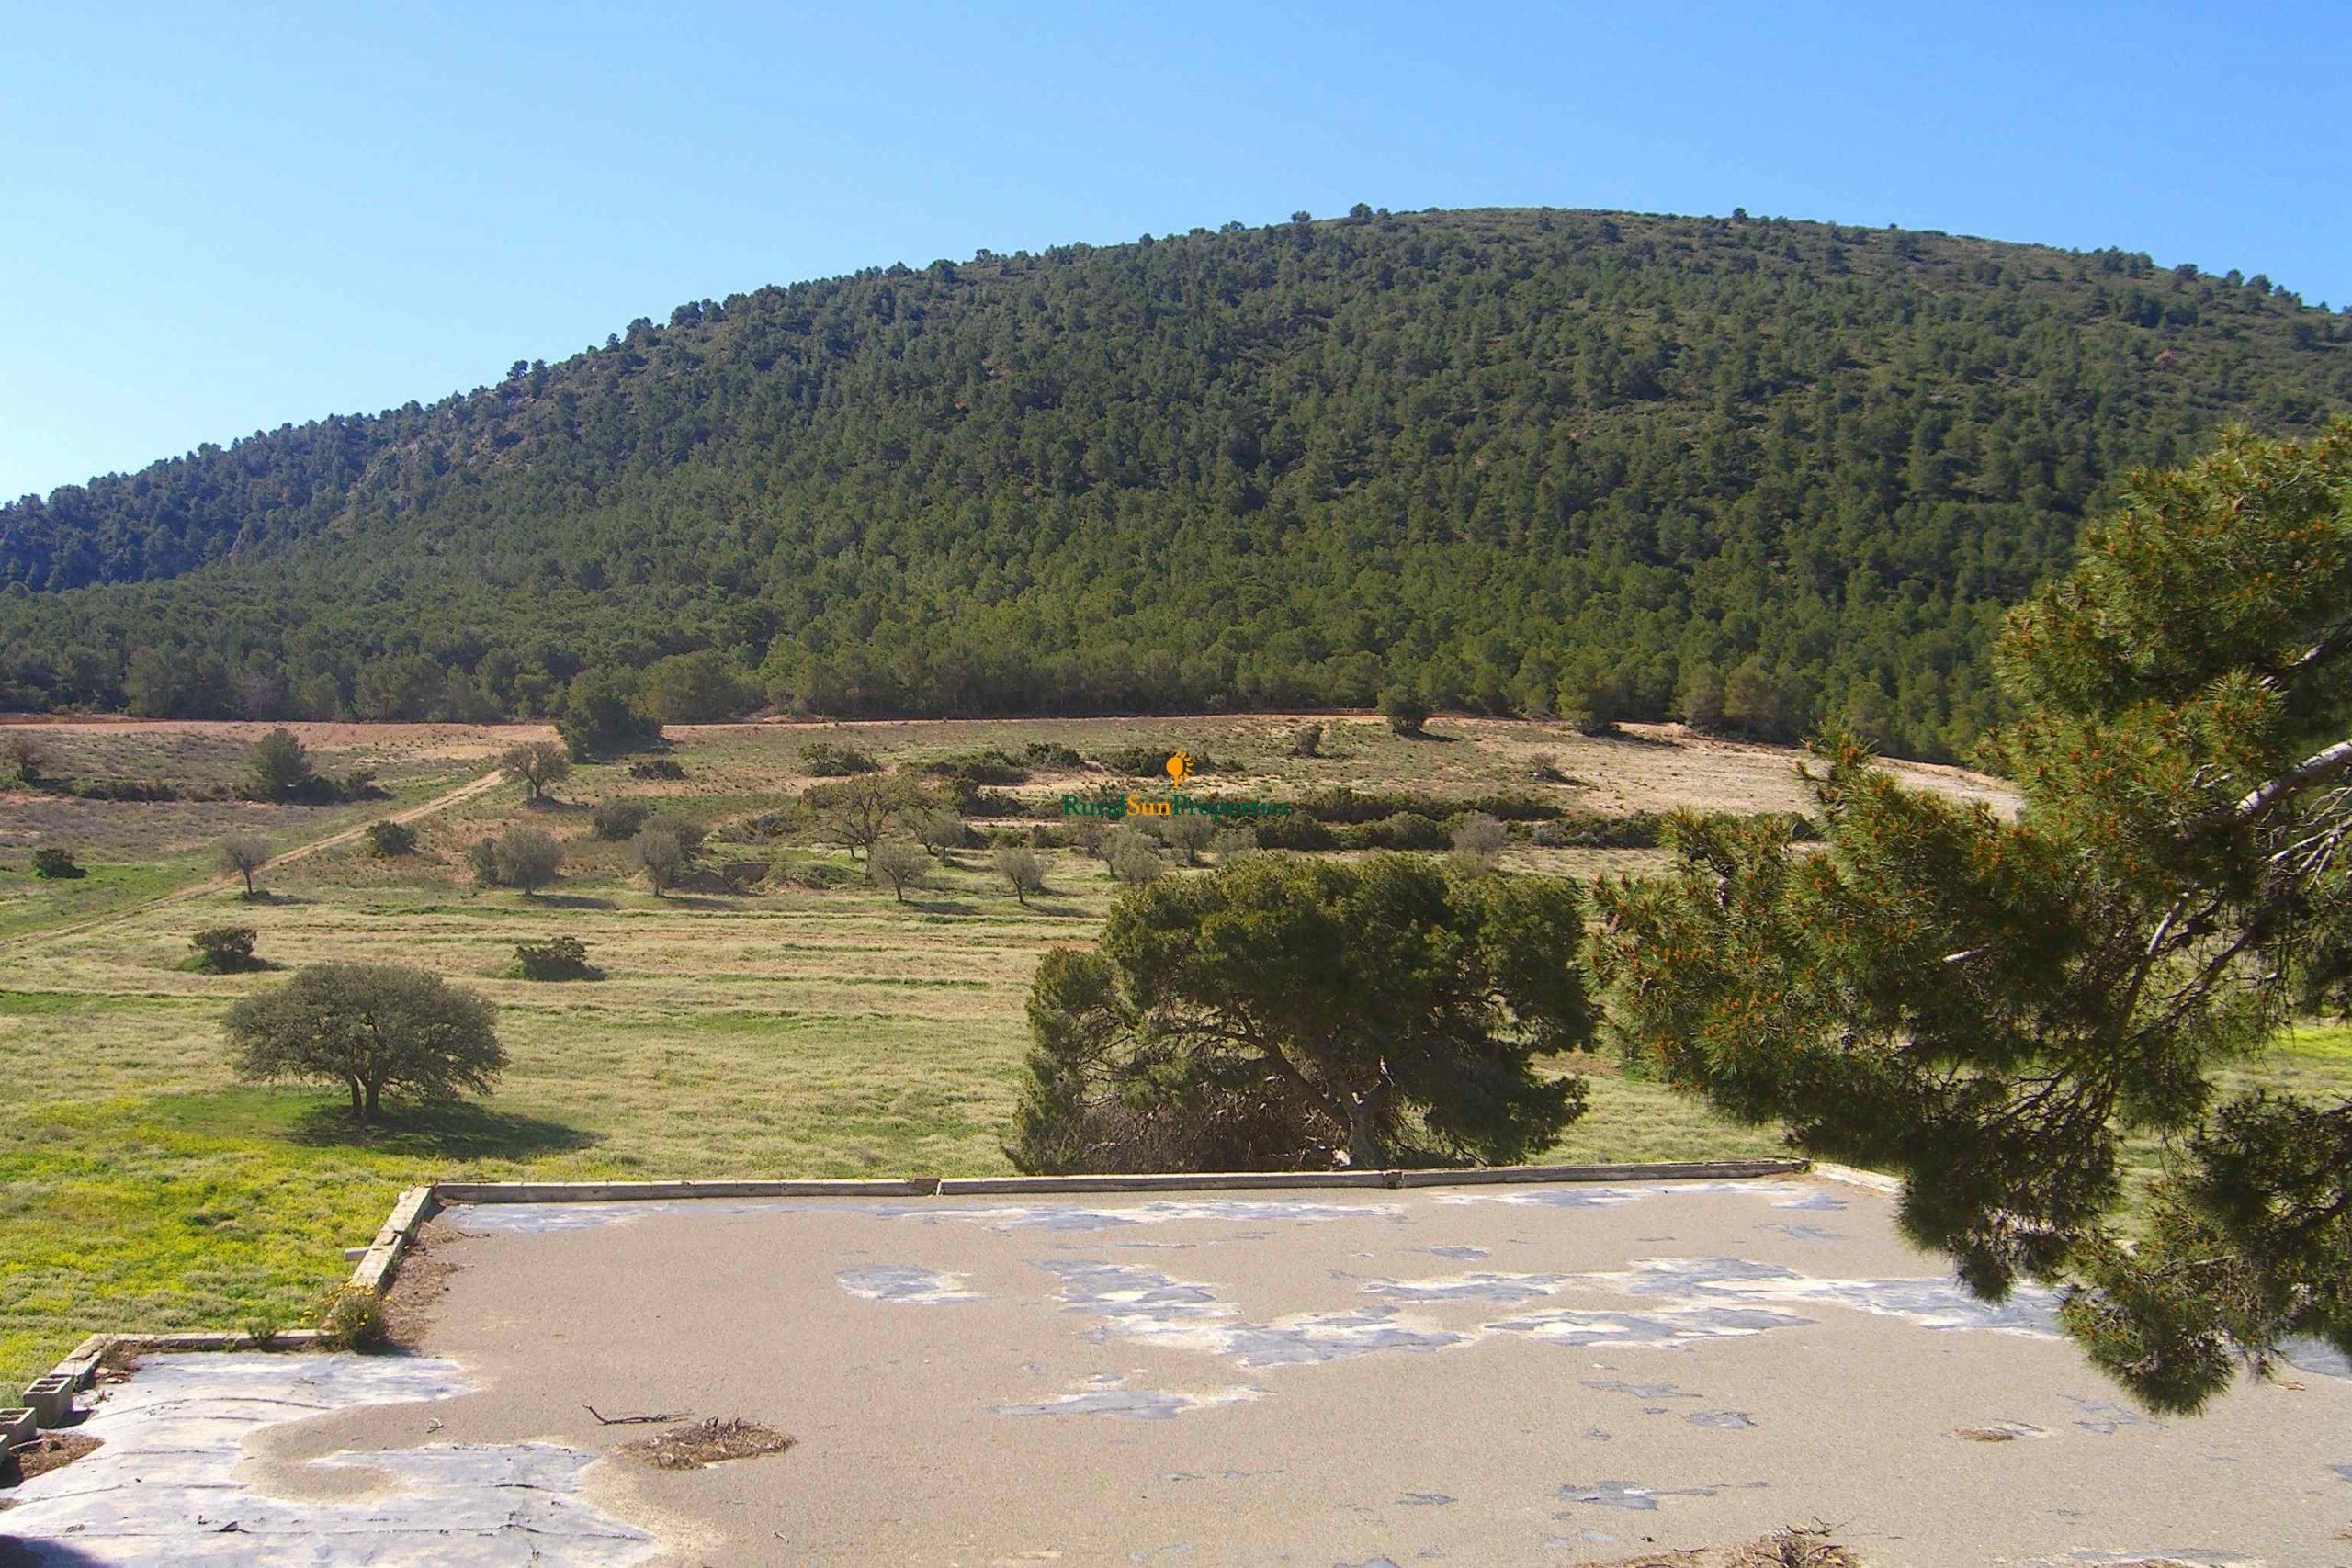 Great spanish Finca for sale in Lorca, located in a place of extraordinary scenic beauty and rich wildlife.